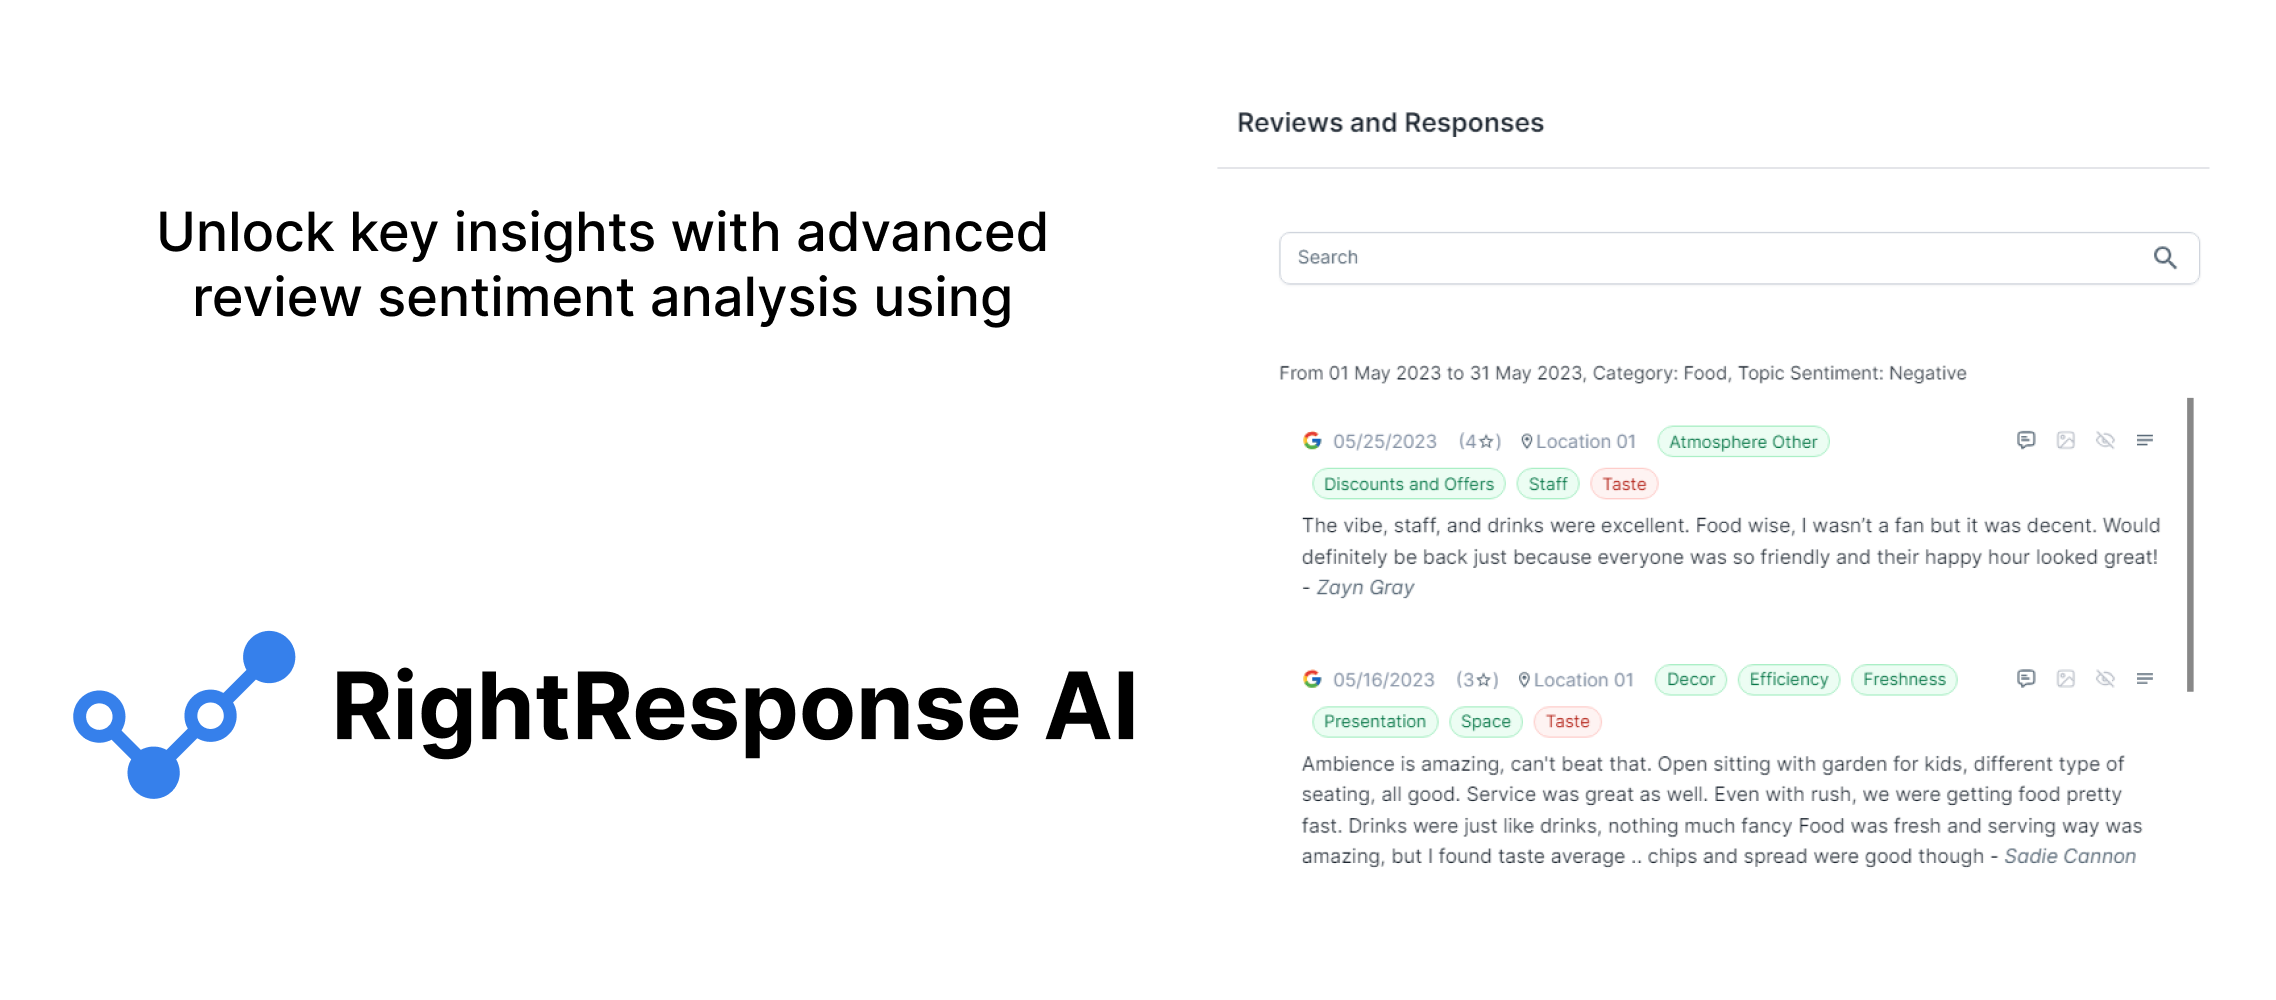 Unlock key insights with advanced review sentiment analysis using RightResponse AI's App